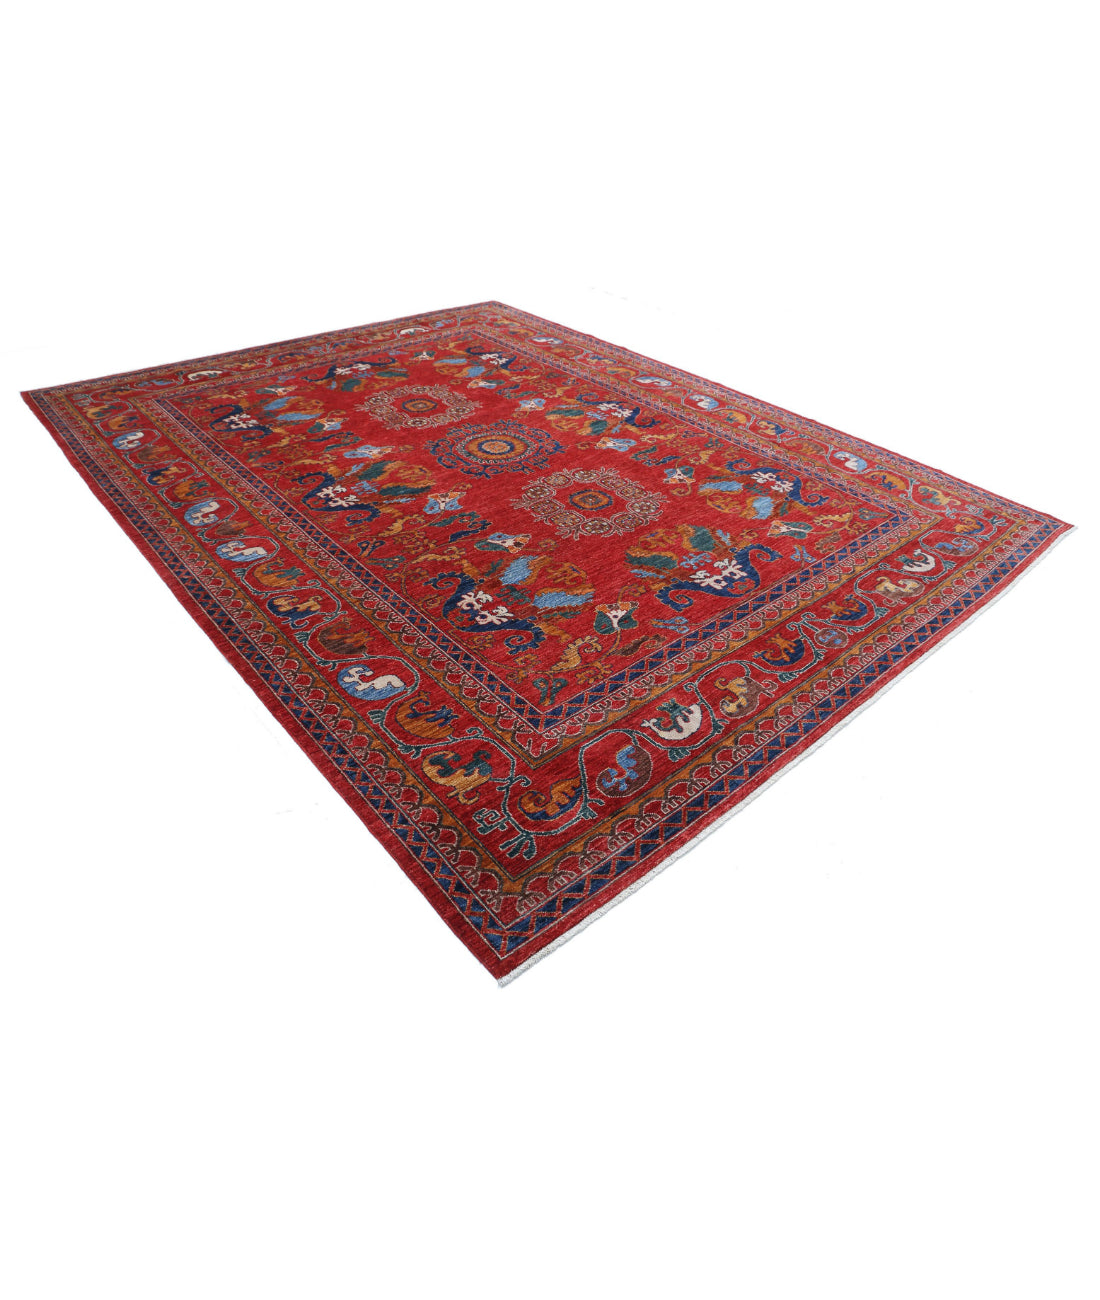 Hand Knotted Nomadic Caucasian Humna Wool Rug - 9'2'' x 11'9'' 9'2'' x 11'9'' (275 X 353) / Red / Blue